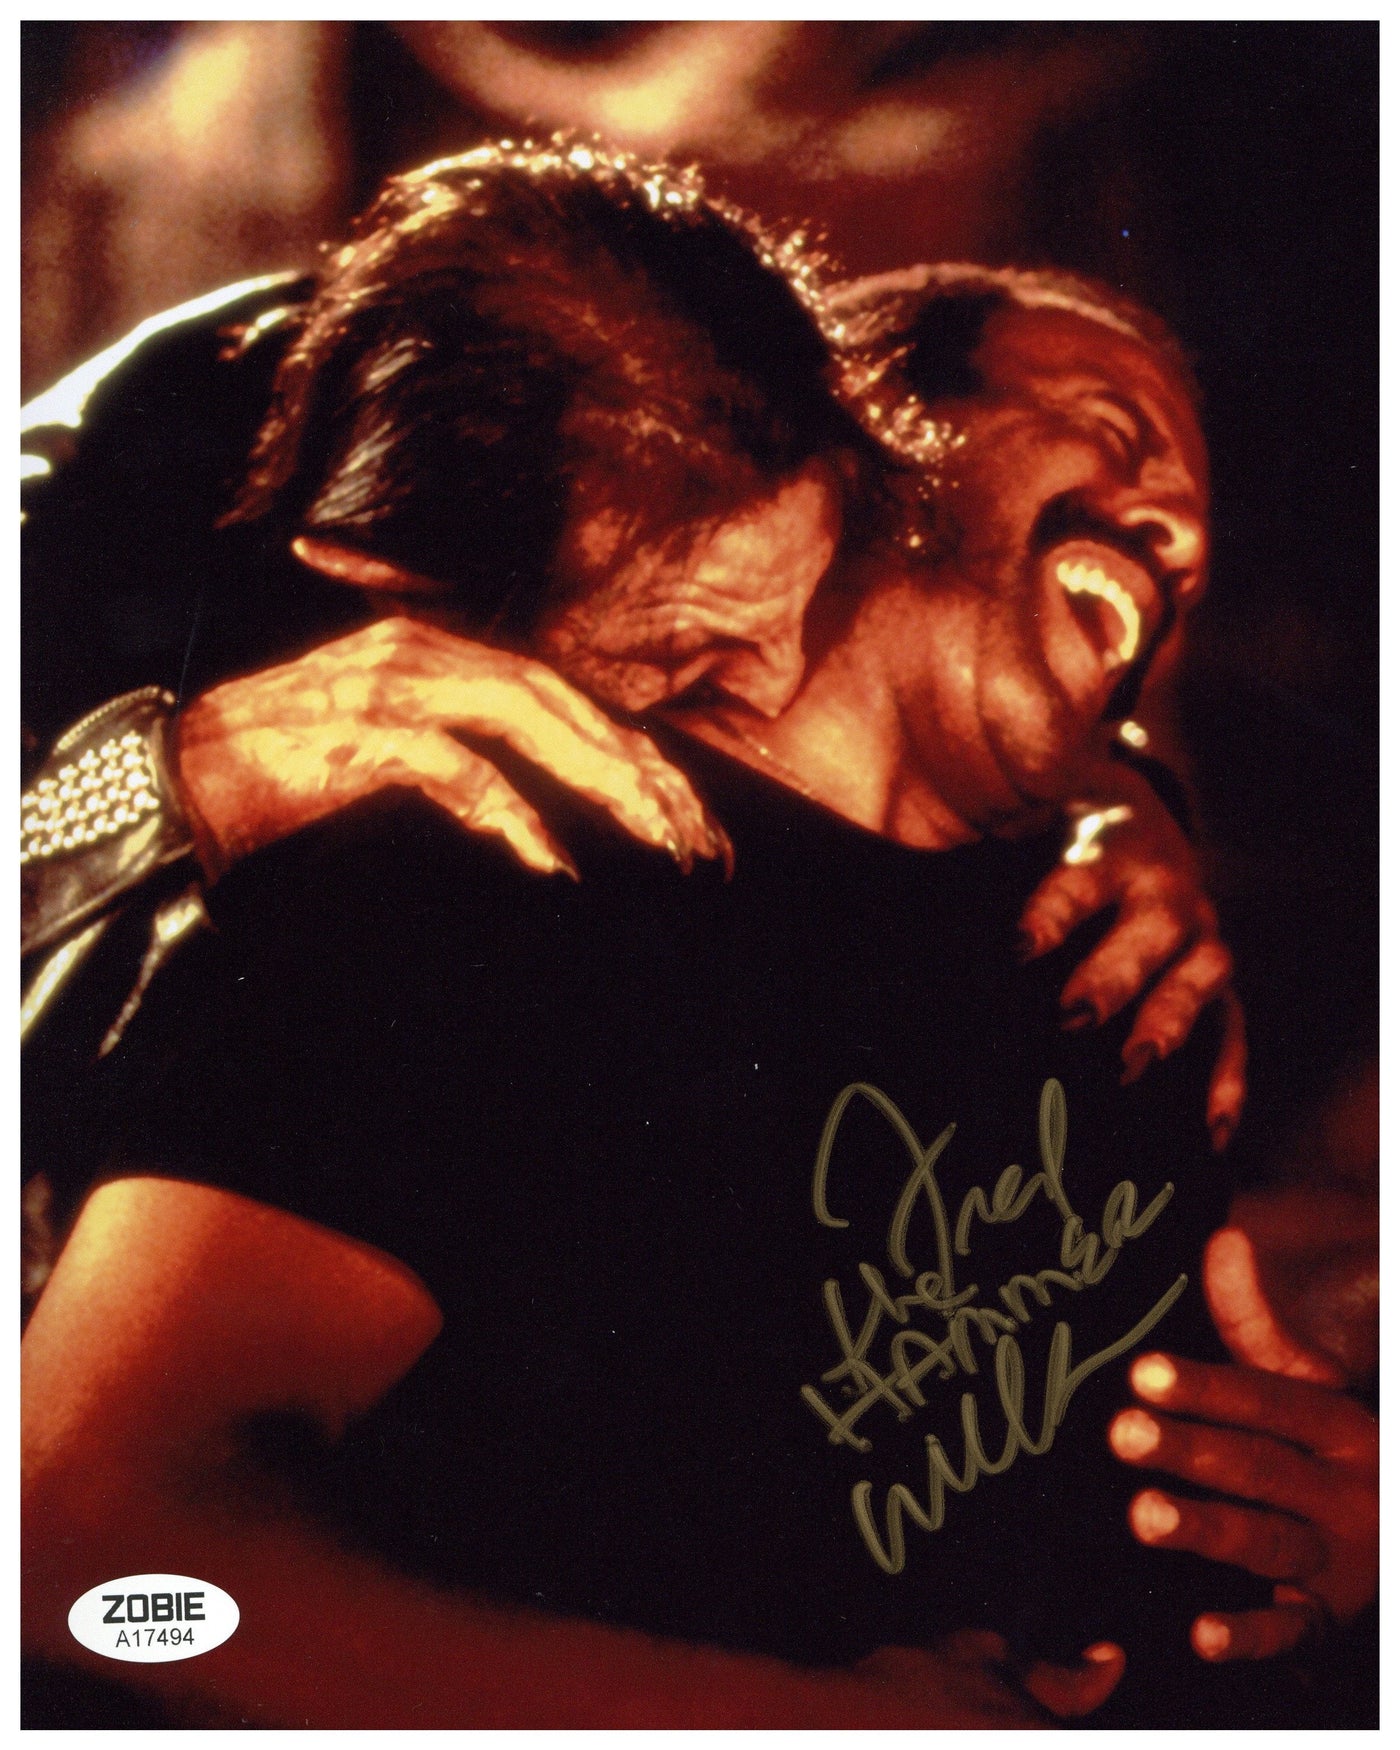 Fred Williamson Signed 8x10 Photo From Dusk till Dawn Autographed JSA COA #2